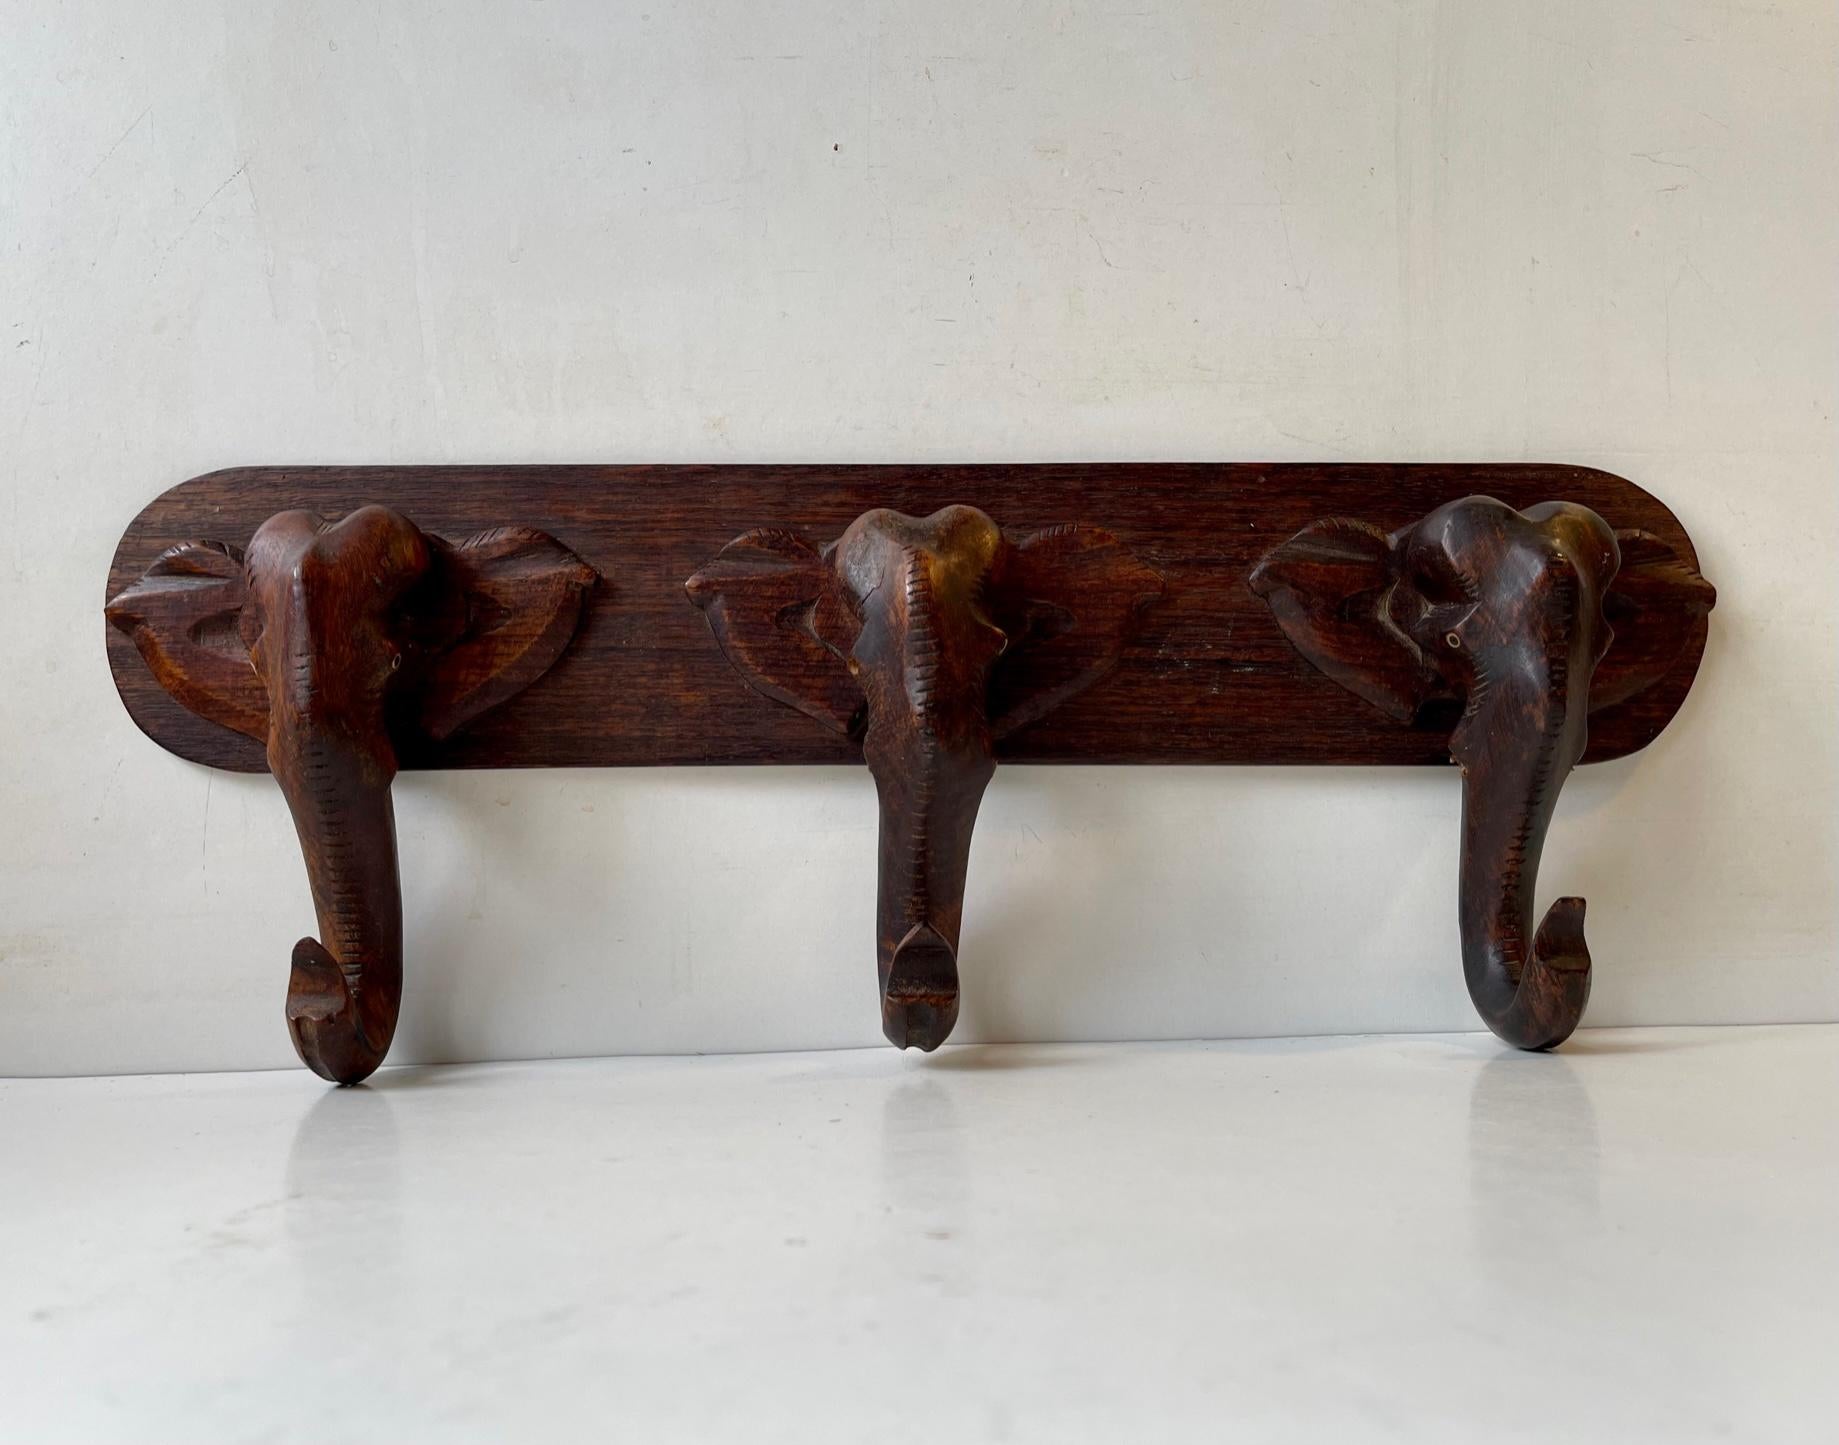 Unusual rack for towels, handbags, hats, coats etc. Its hand carved in Dark wood with fine details. According to its previous owner his grandfather has ordered this piece locally in Denmark at a furniture maker. It has lost its teeth which are